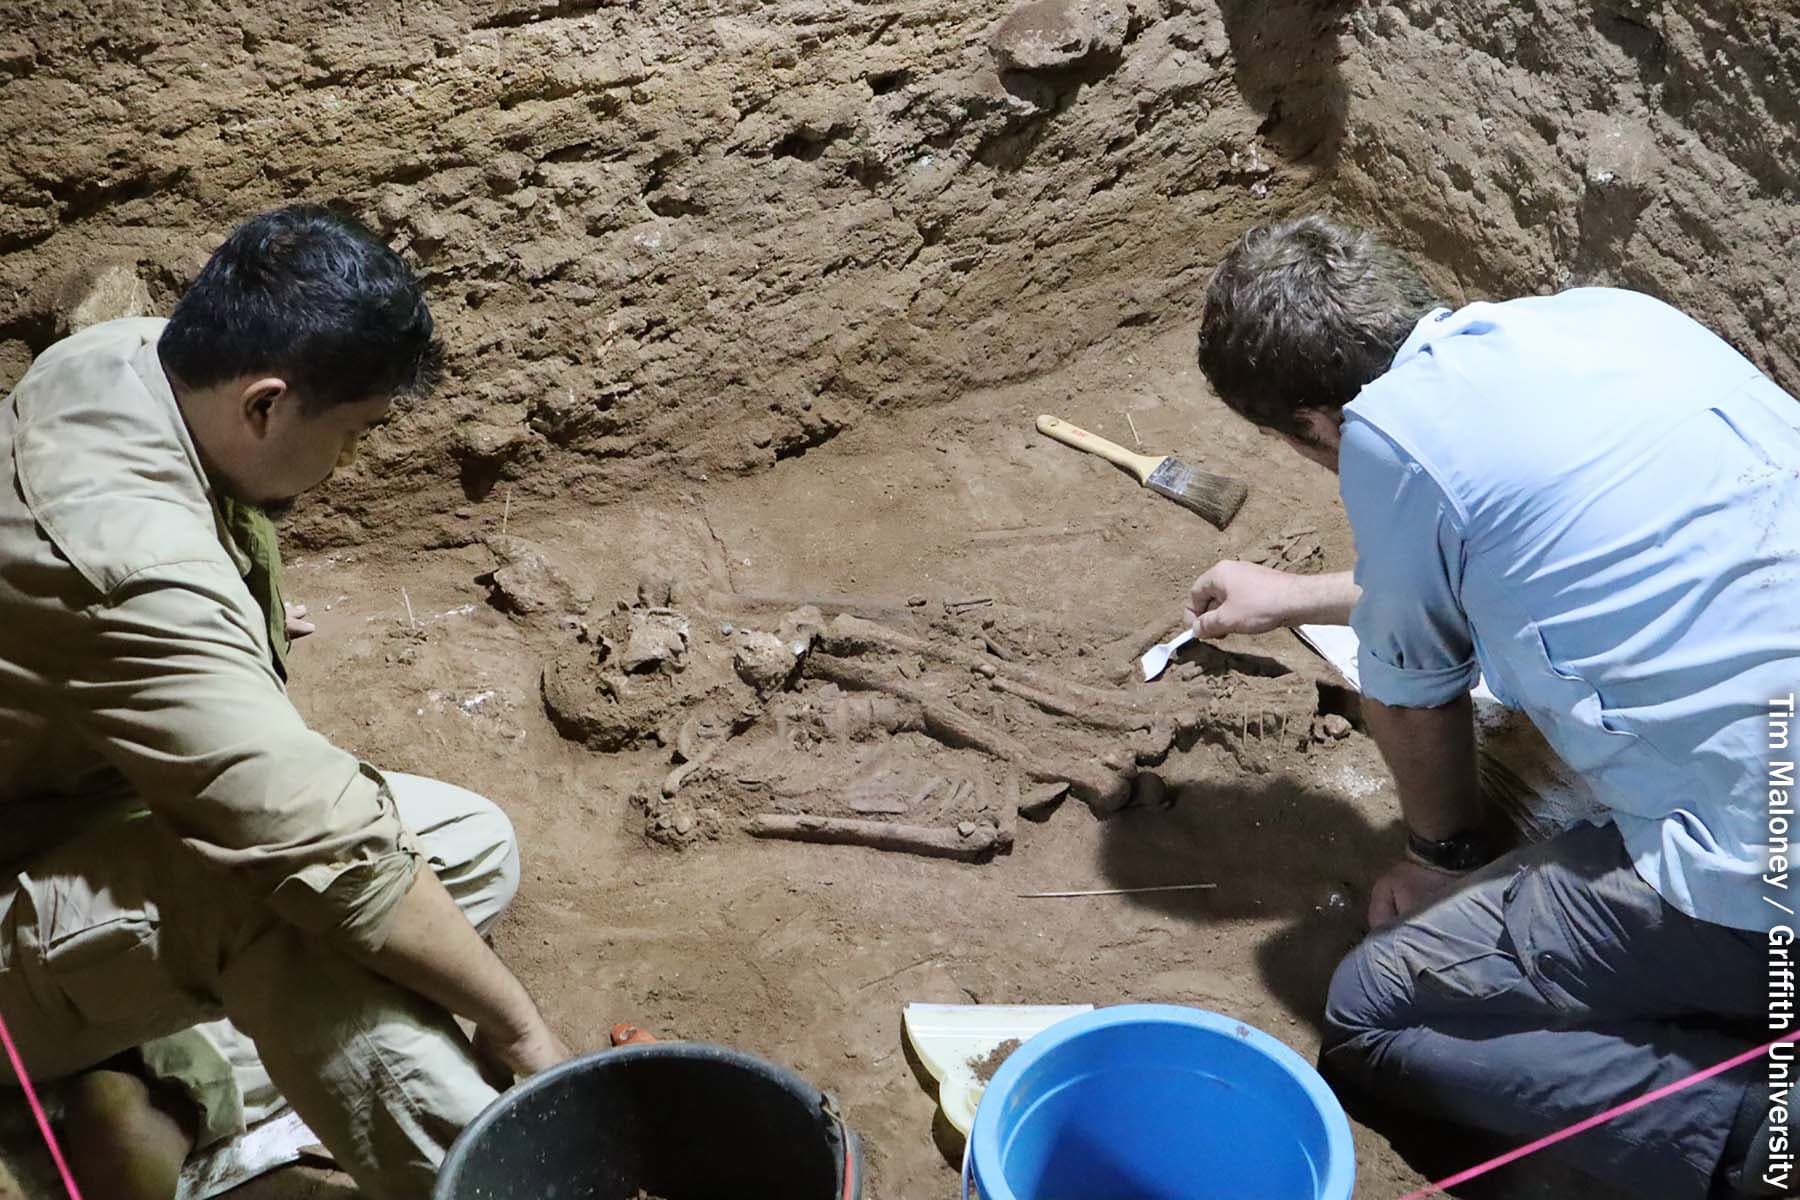 31,000-Year-Old Skeleton May Be Earliest Known Human Amputee